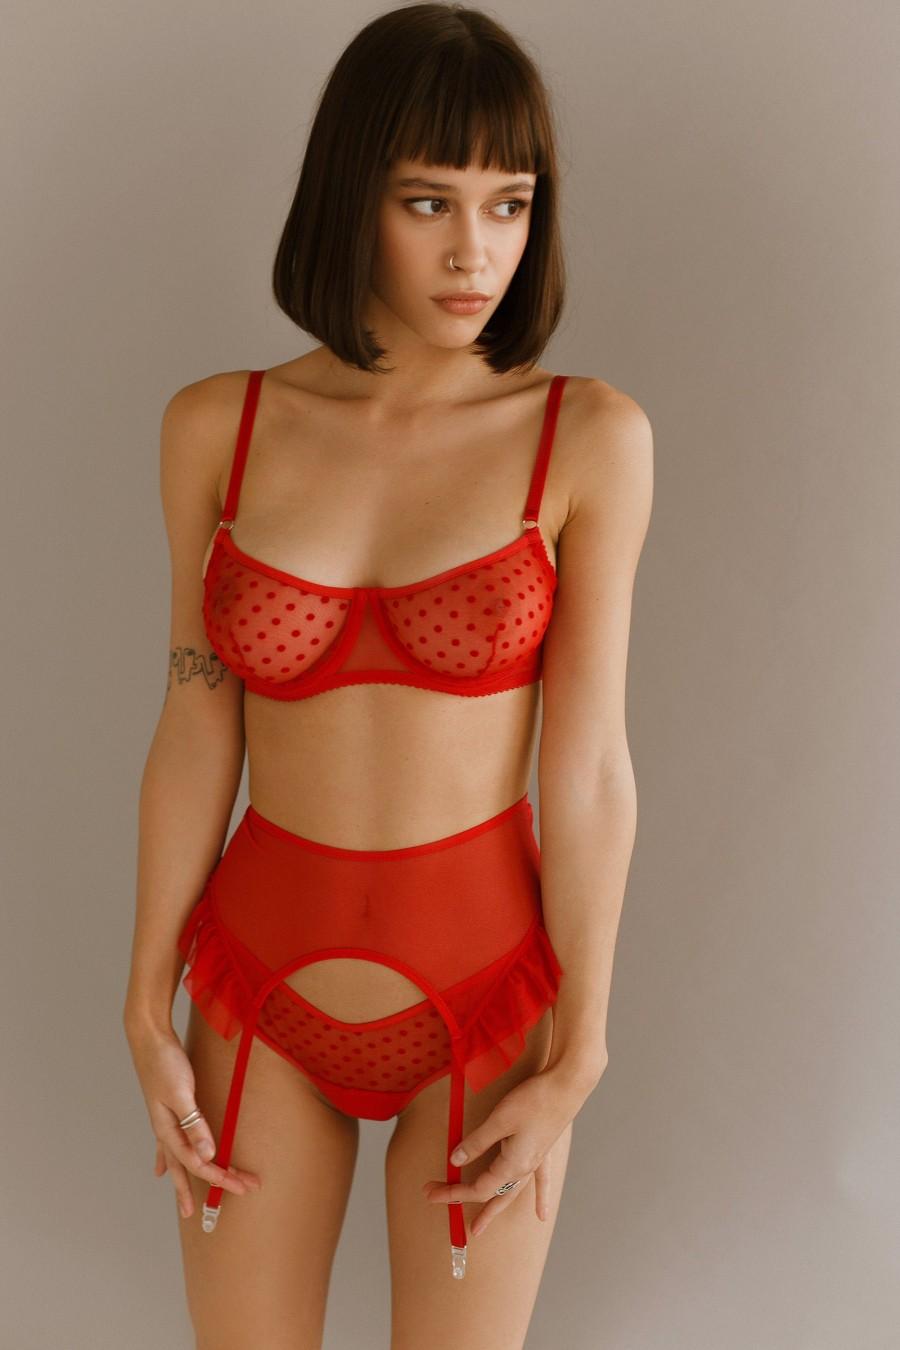 Mariage - valentines gift / valentines day / st valentines / see through lingerie / red lingerie / sexy lingerie  / erotic lingerie / sheer lingerie